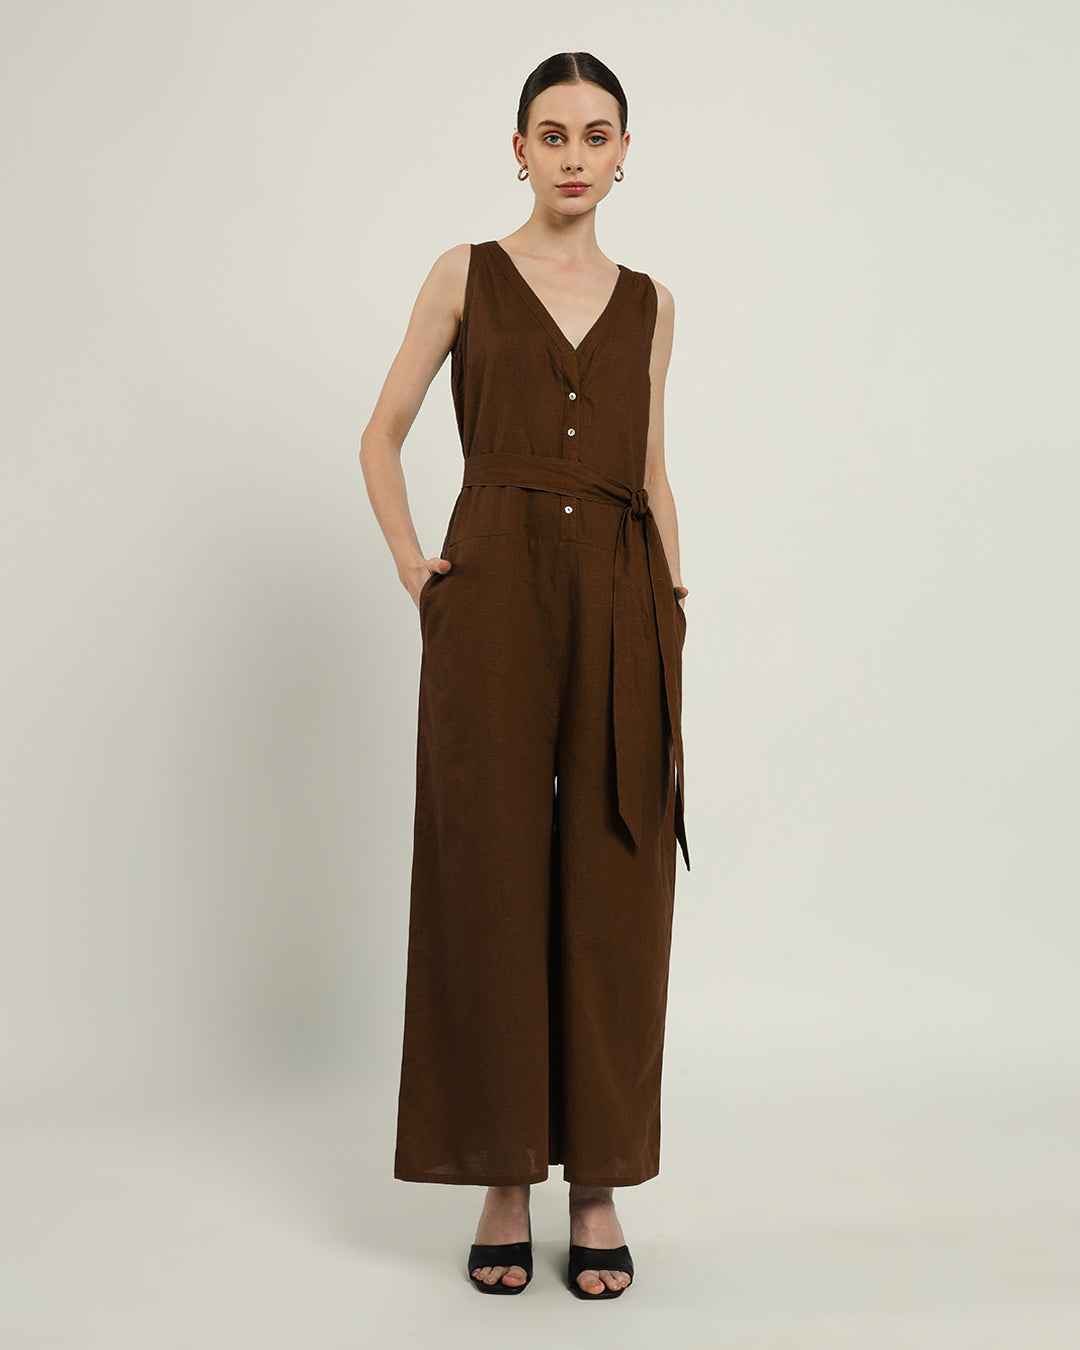 Nutshell Run The Show V Neck Button Down Jumpsuit